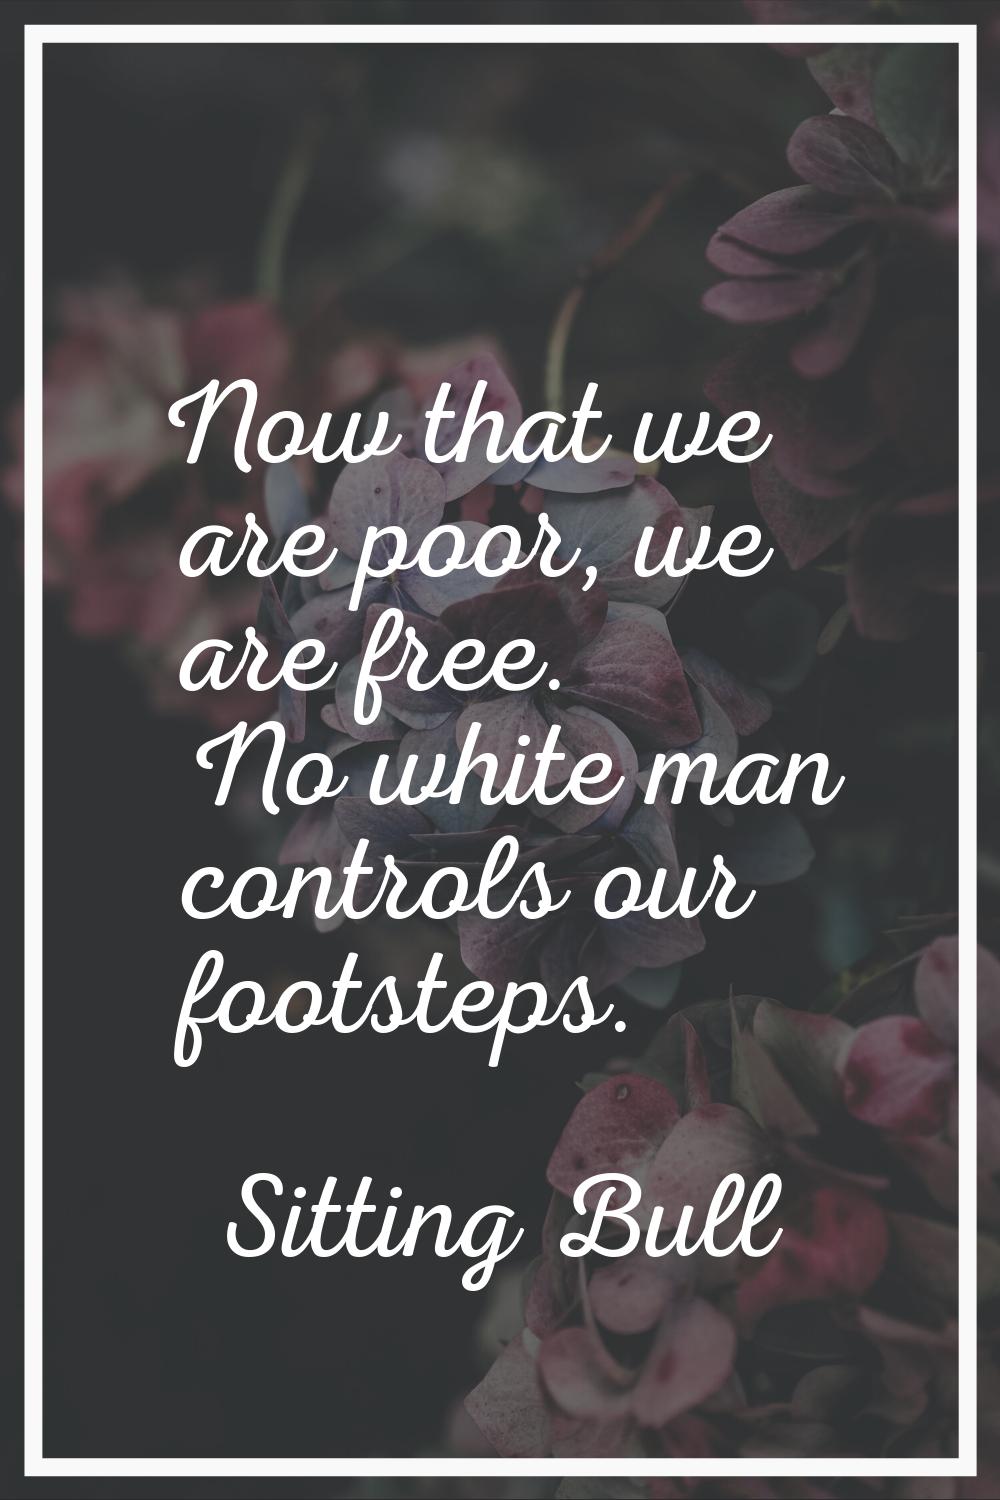 Now that we are poor, we are free. No white man controls our footsteps.